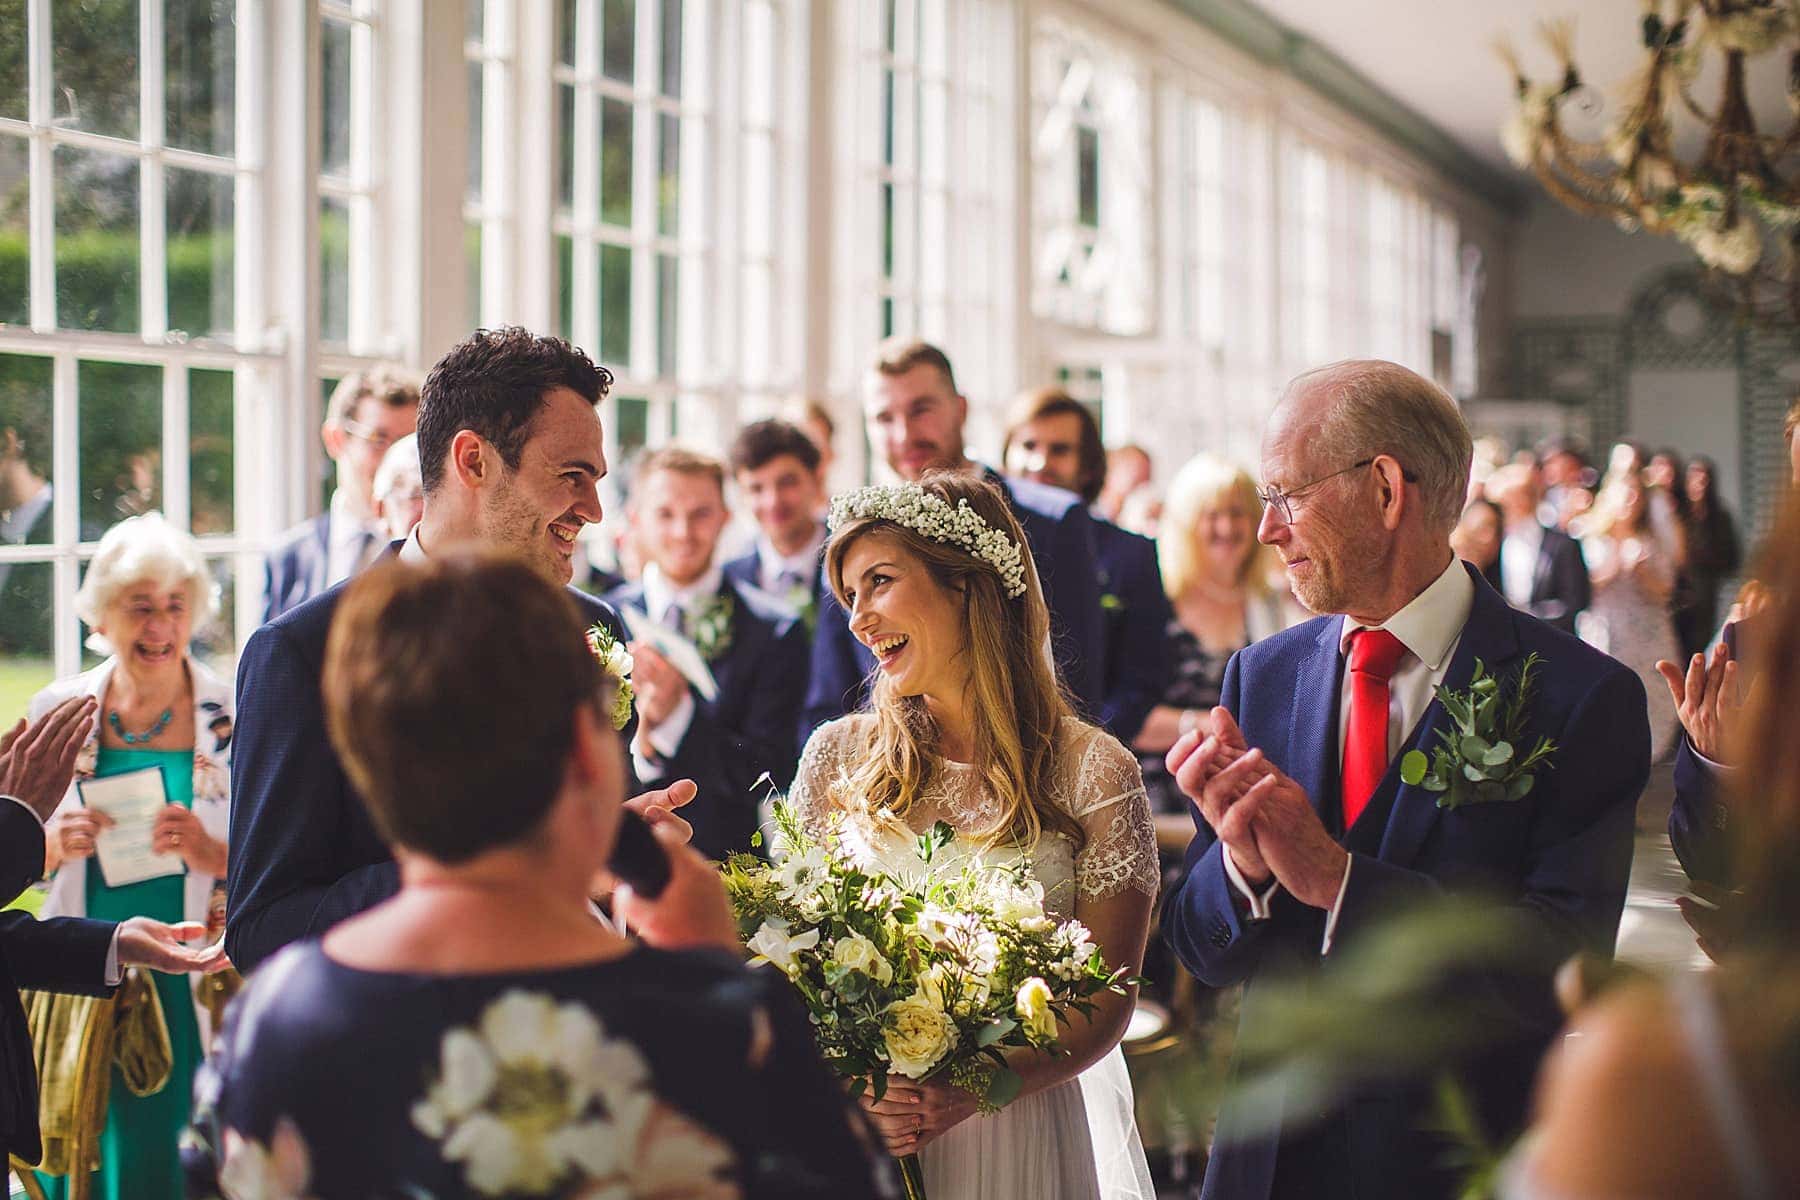 brighton wedding photographer,hugh and emily potter,st peters church brighton,pang dean old barn,confetti exit,